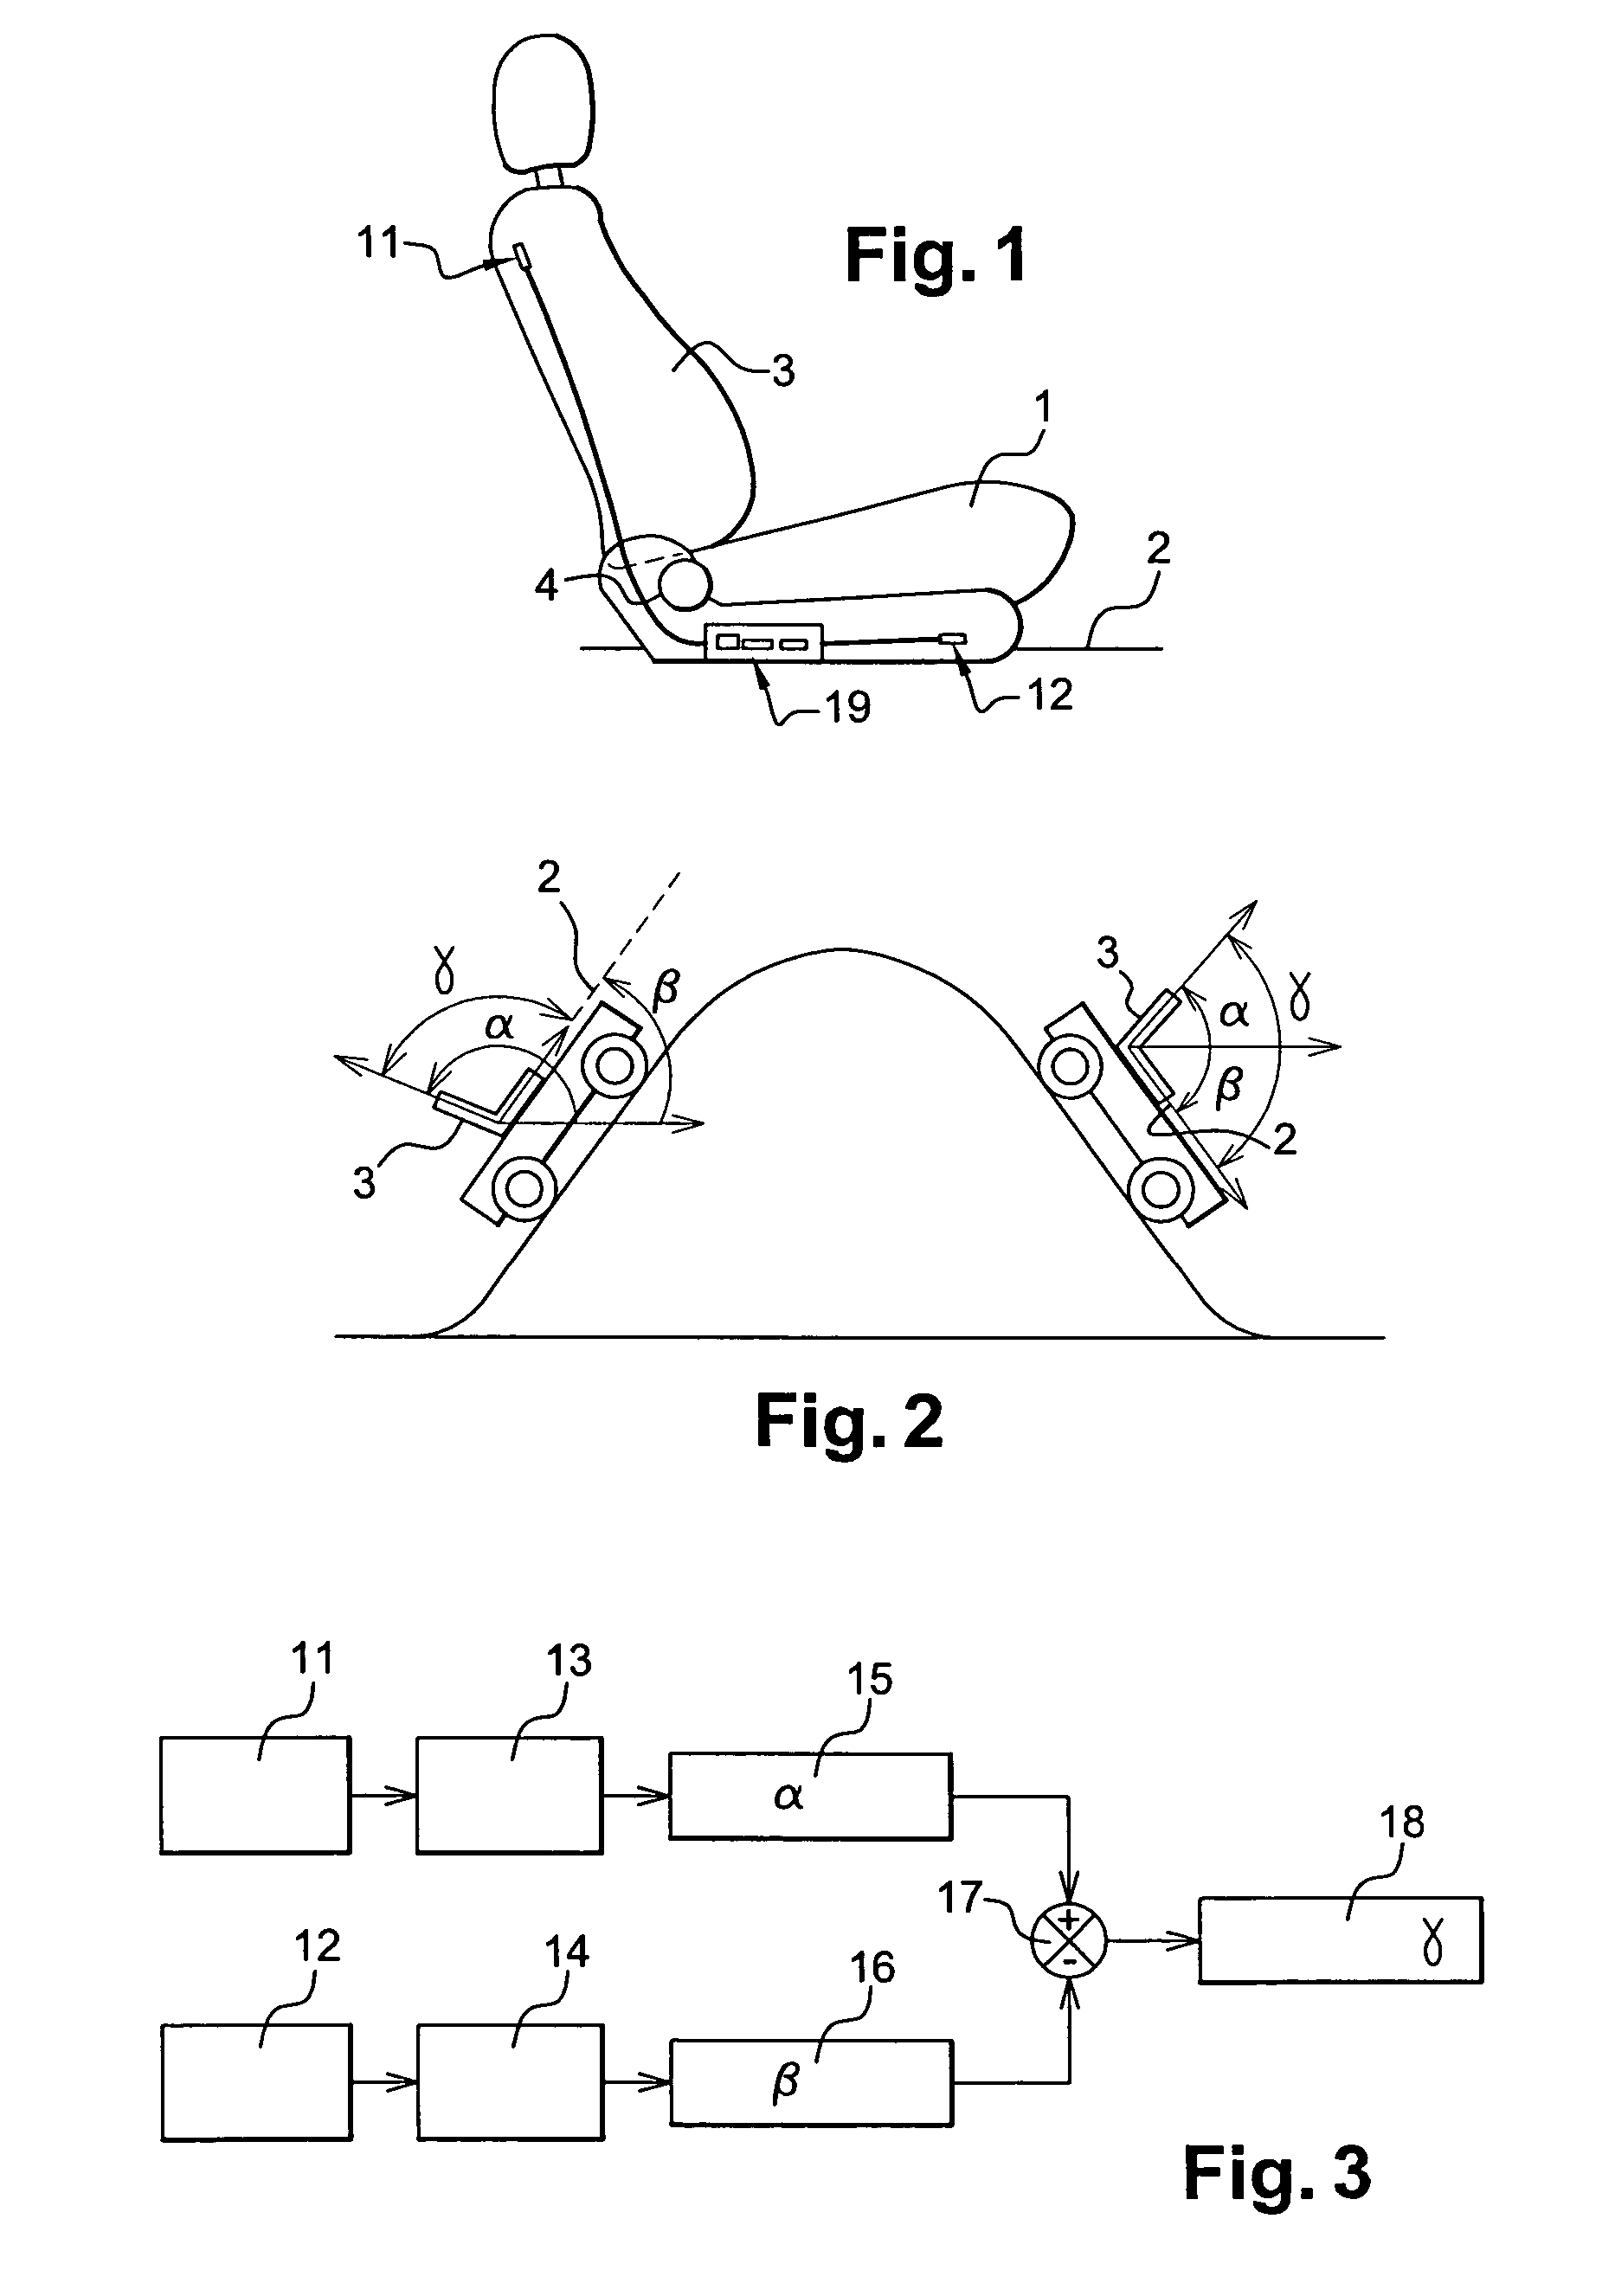 Automobile seat system including a backrest inclination measuring device